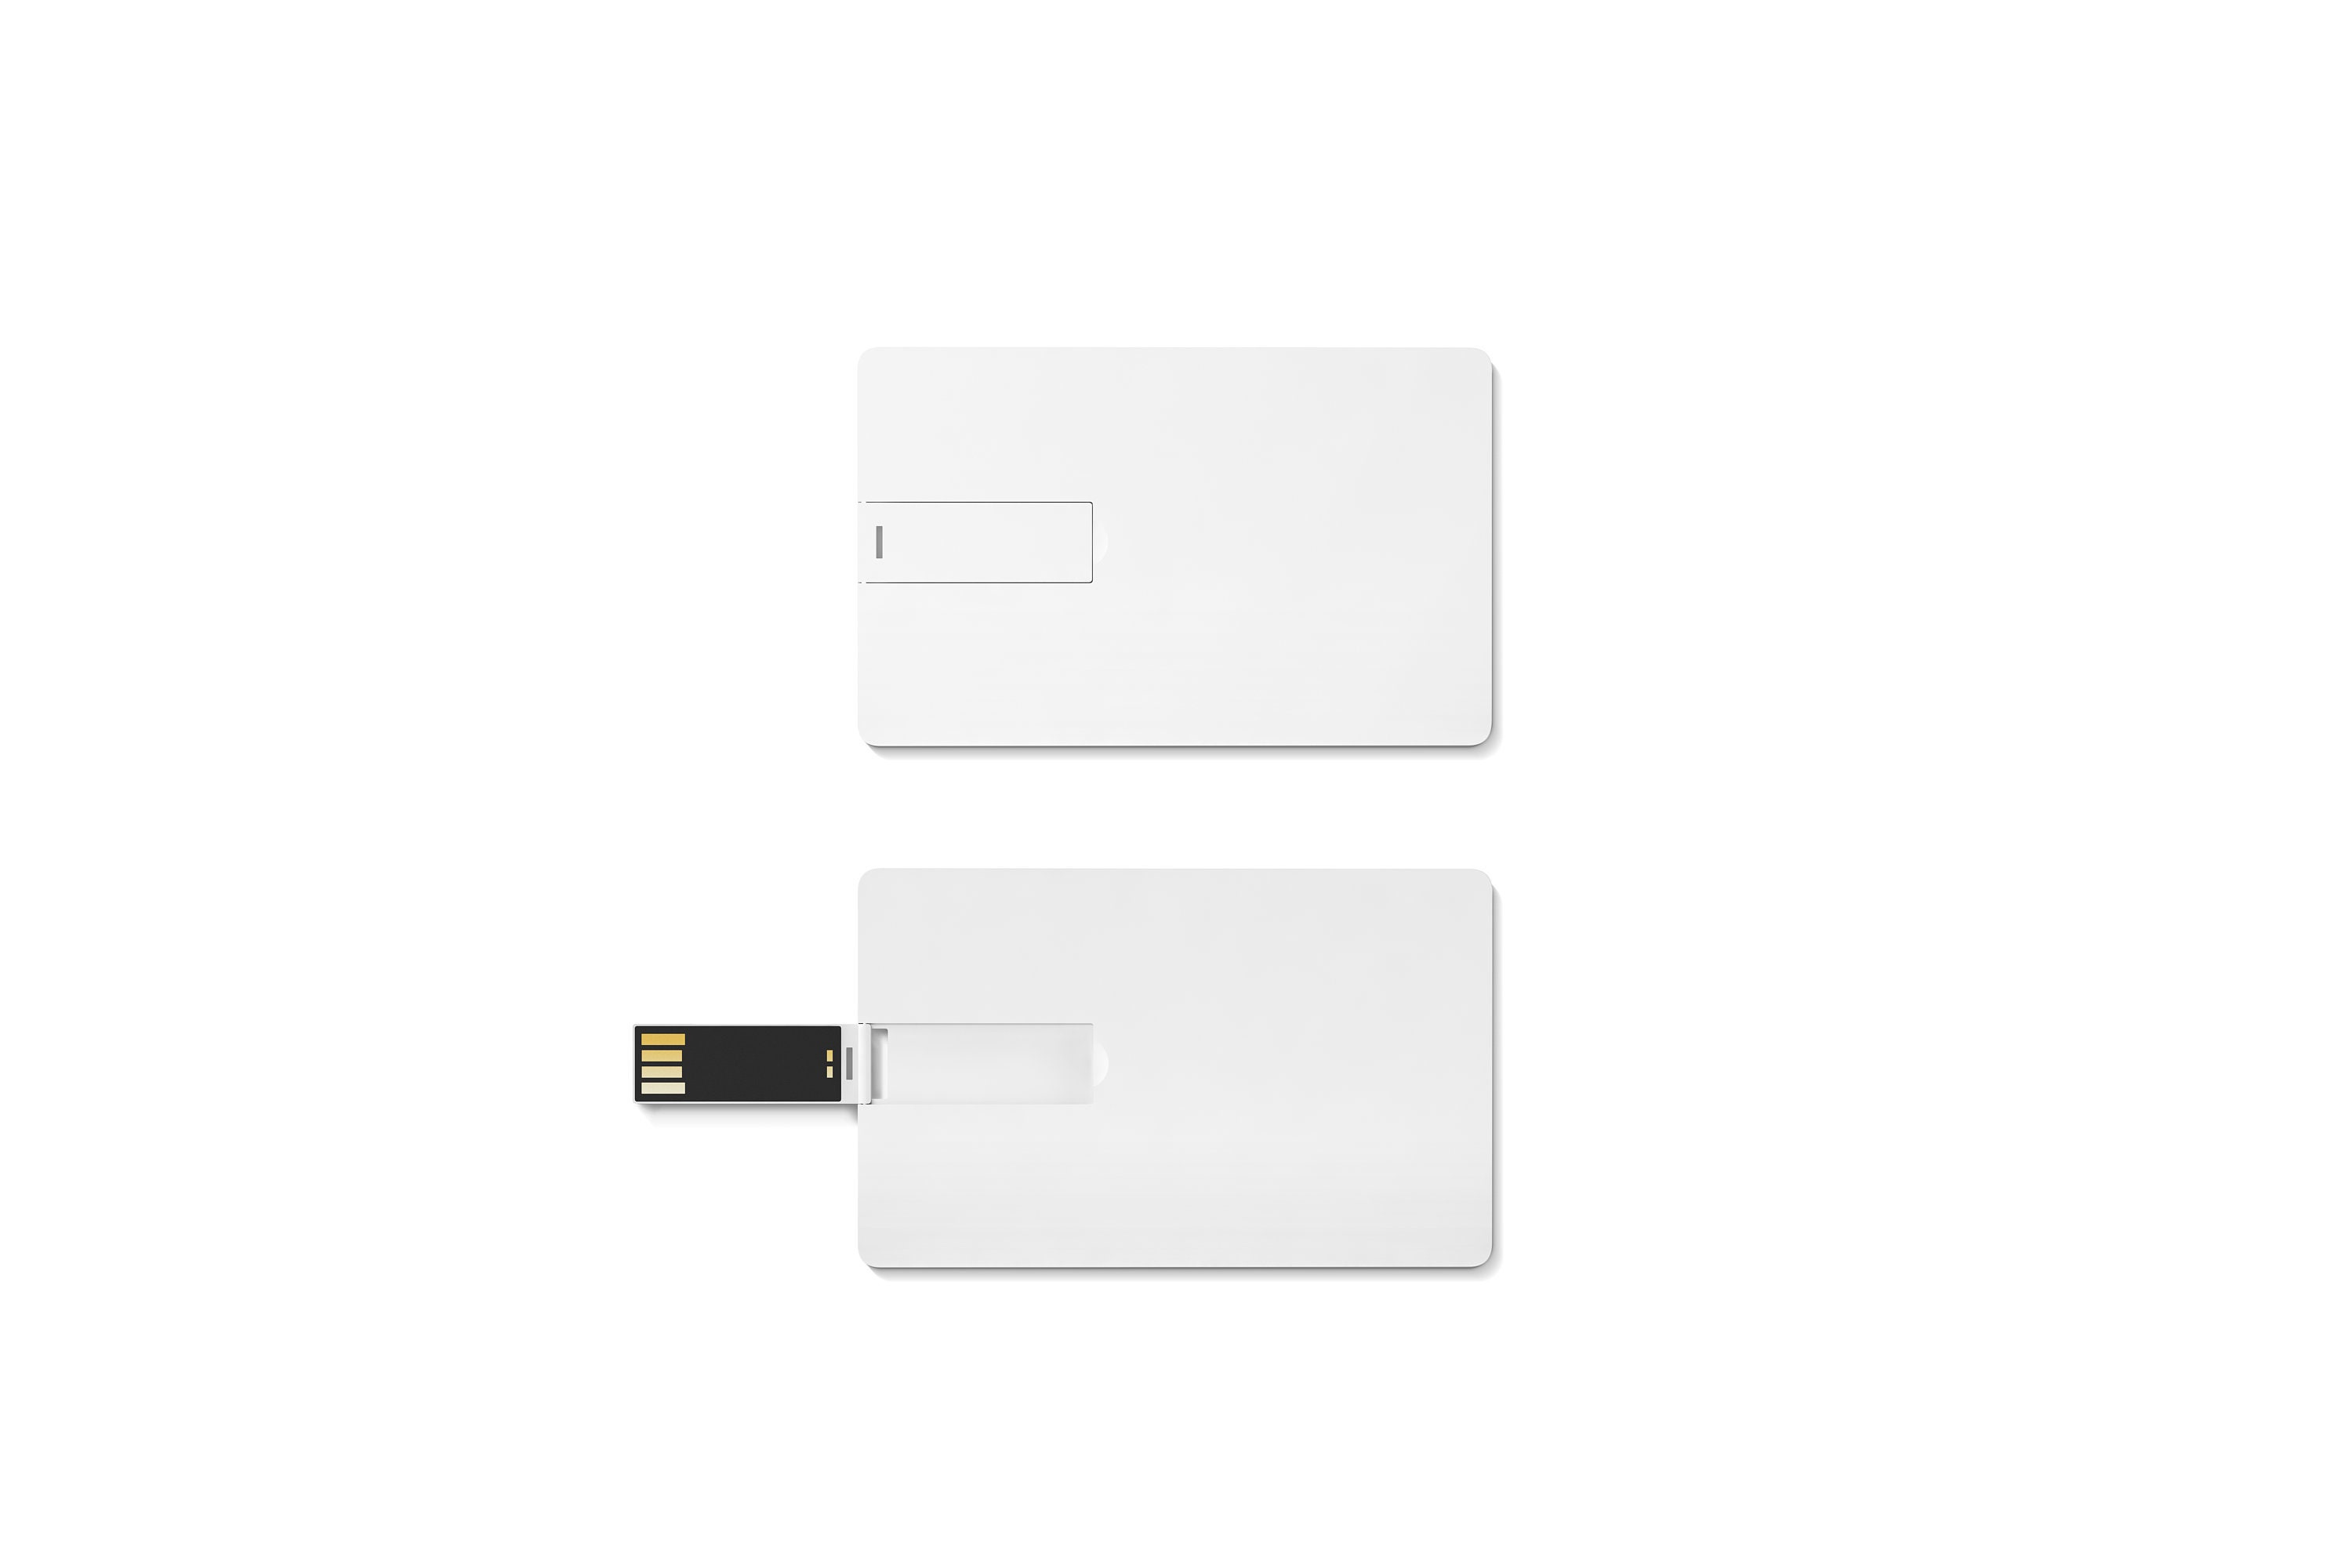 Download Lying Wafer Usb Card Mockup Front And Back View Flash Drive Etsy